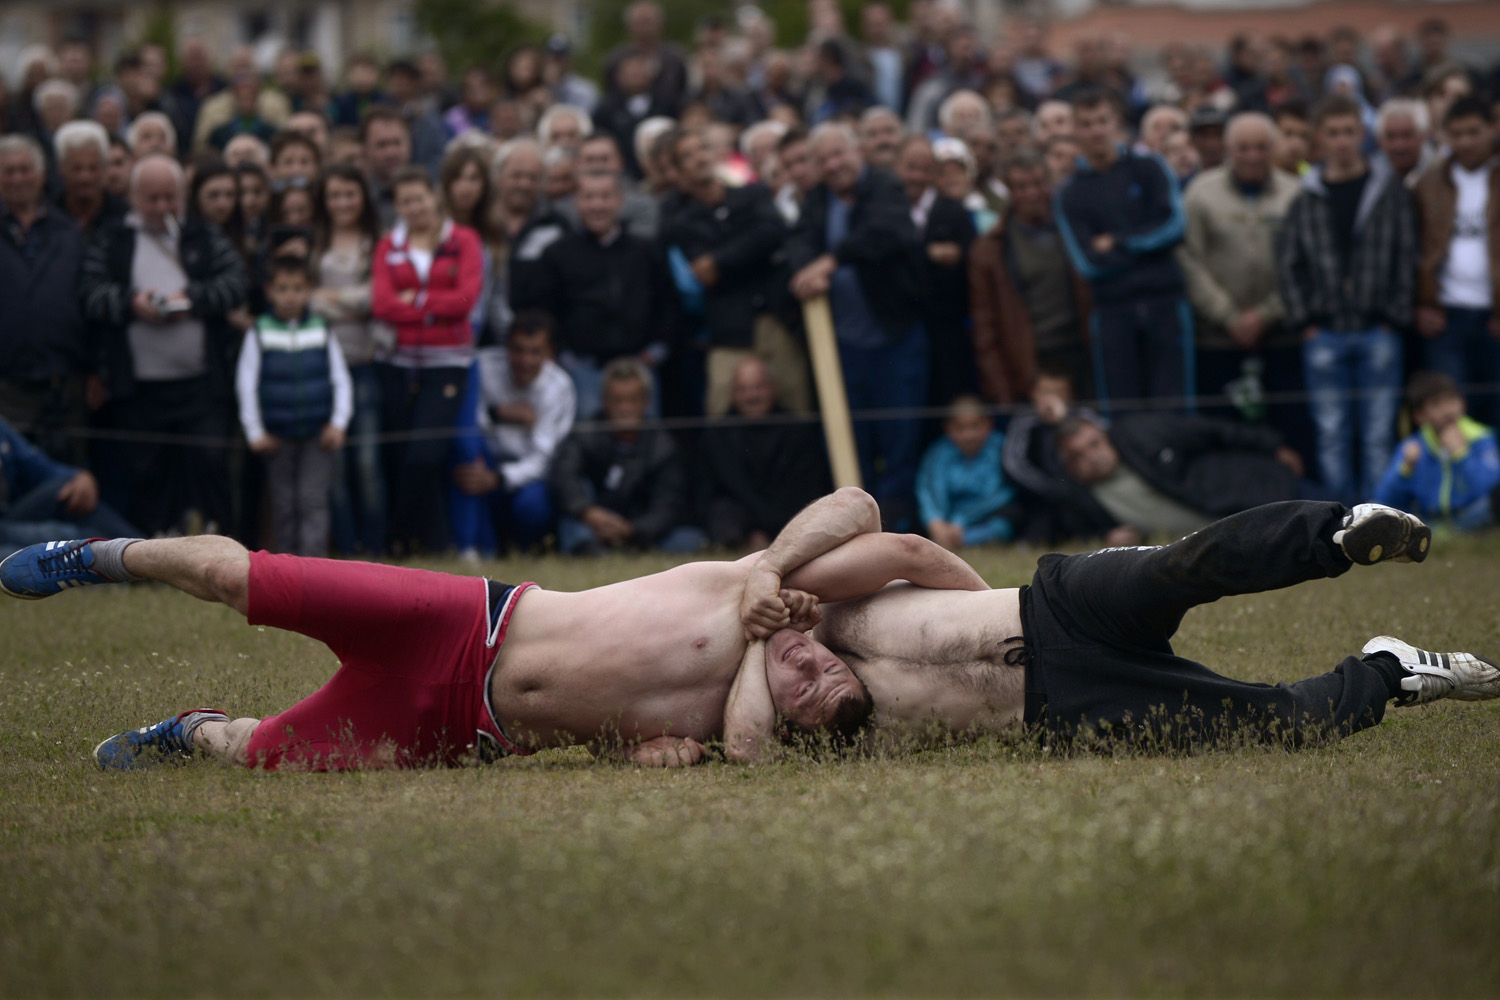 Two men compete in a wrestling tournament, part of a holiday marking the circumcisions of young boys in the village of Draginovo, some 180km south-east of Sofia, Bulgaria, on May 4, 2014.